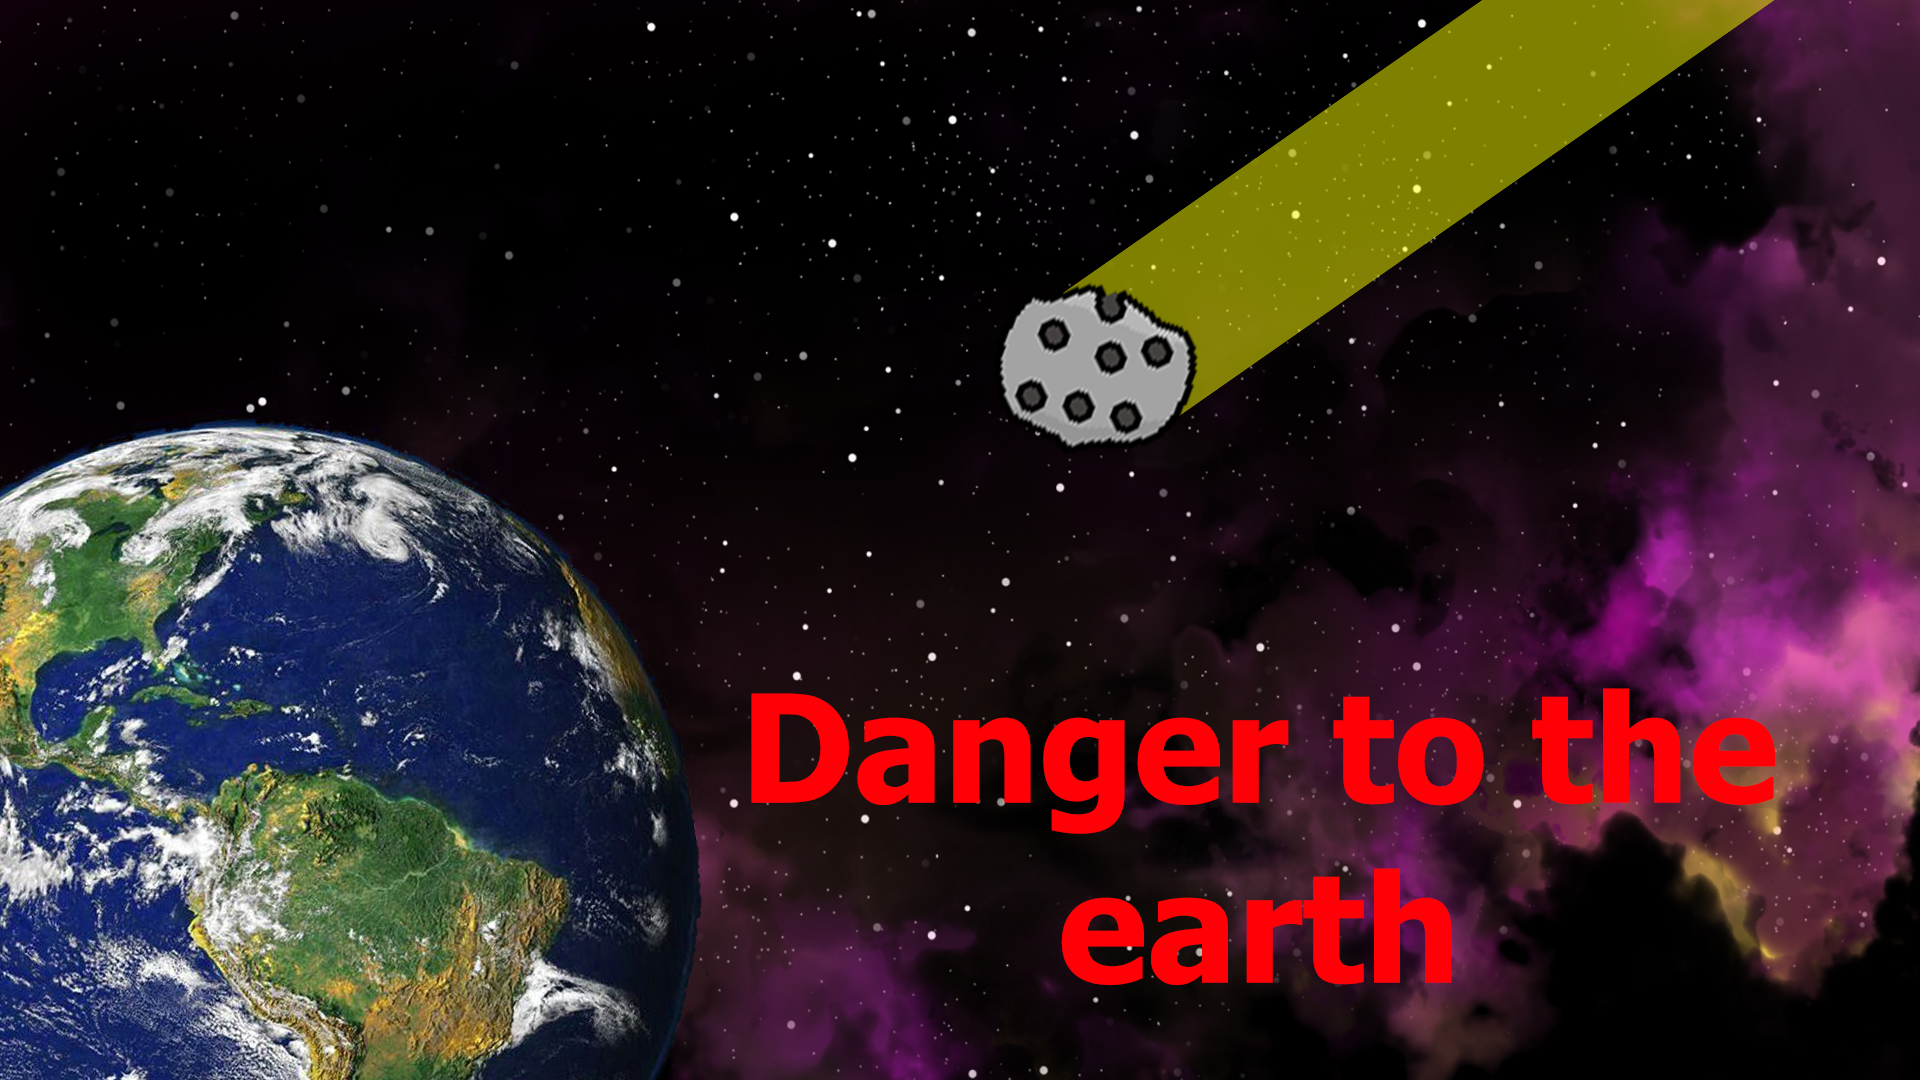 Danger to the earth